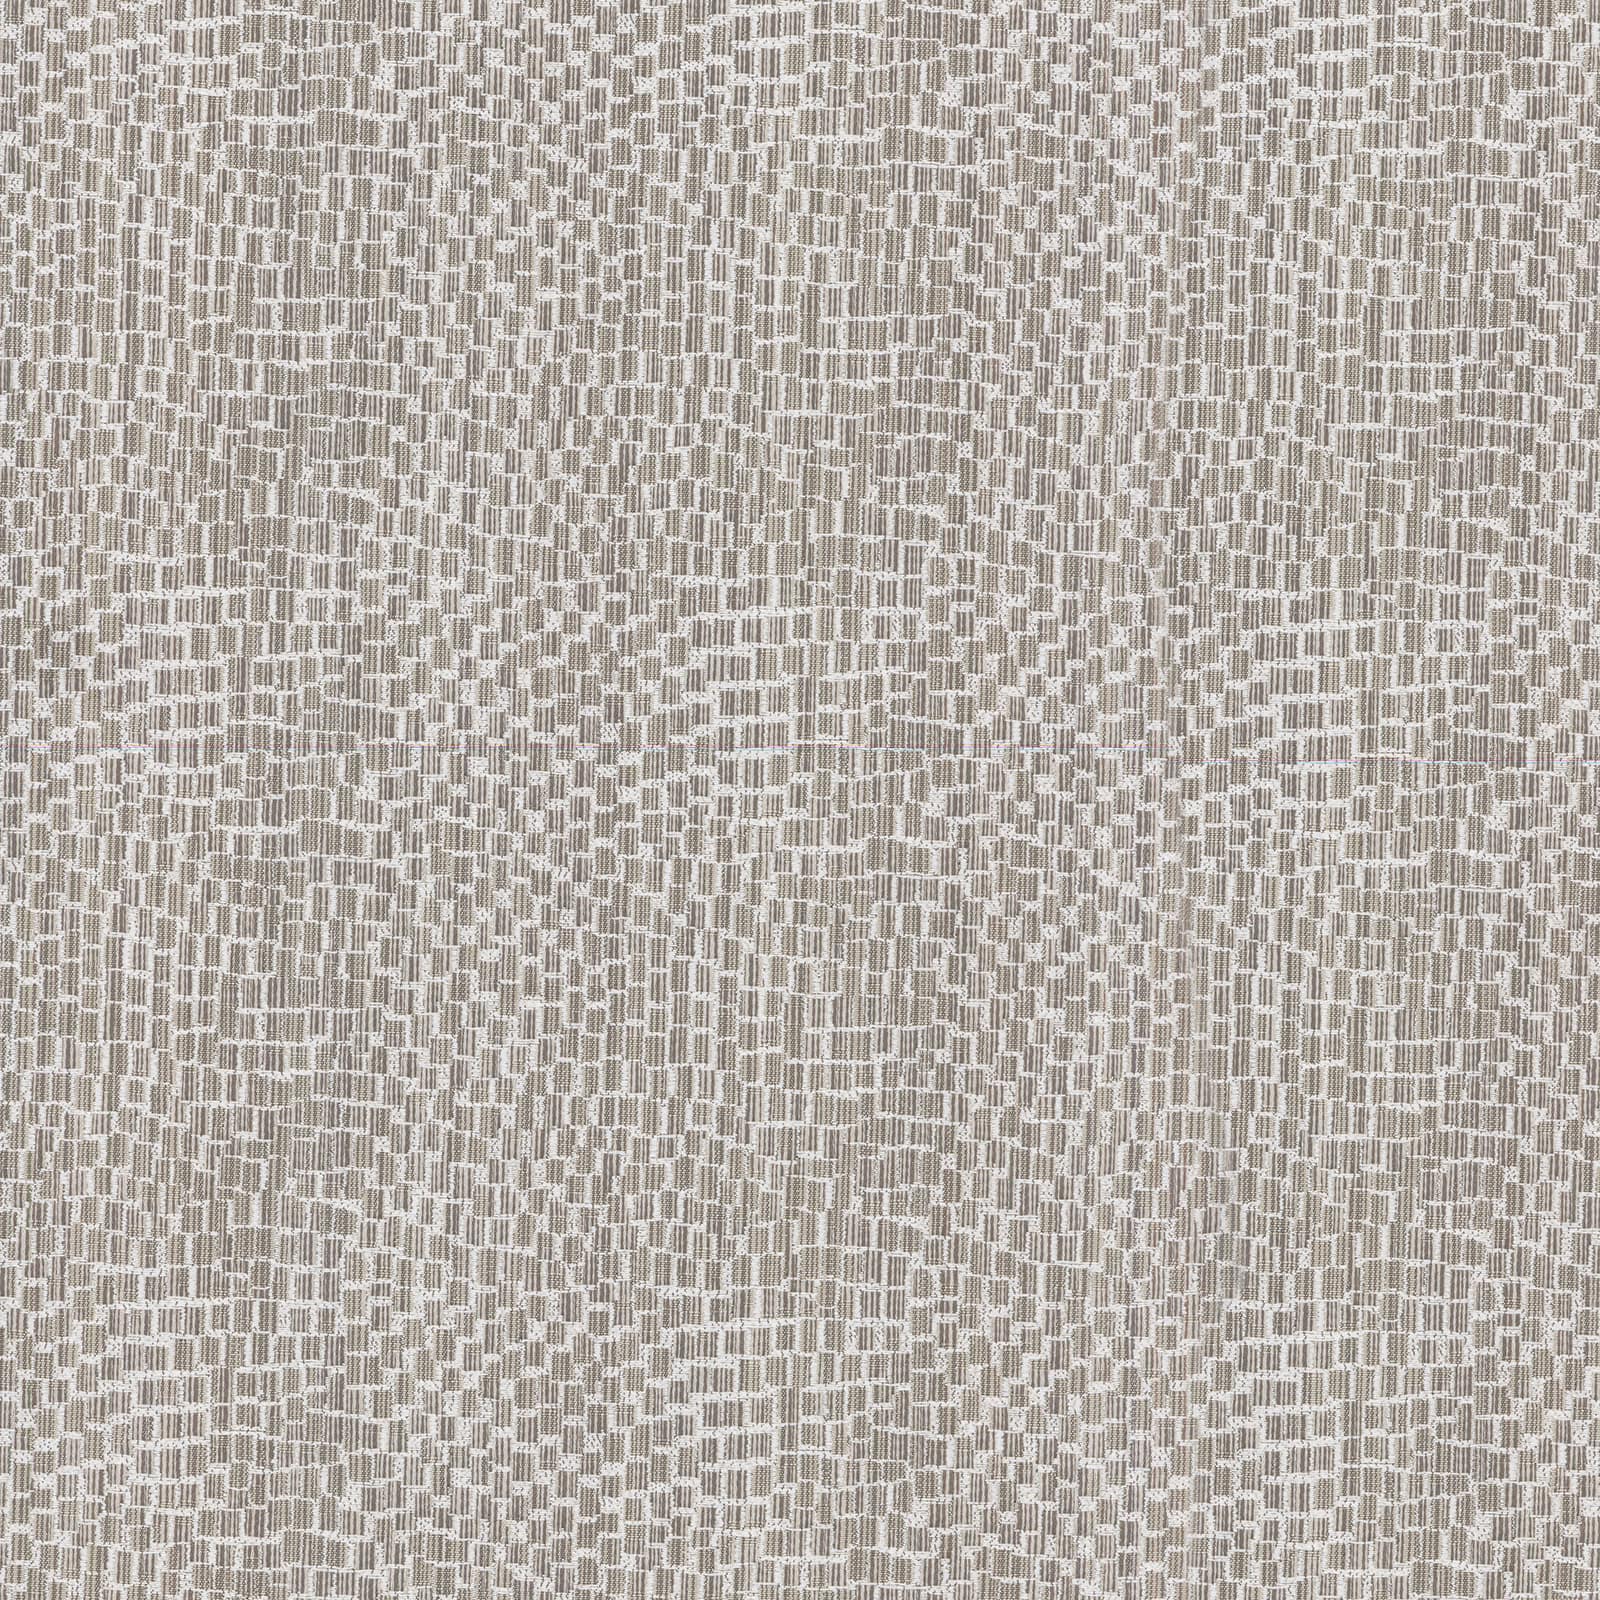 Purchase the PKL Studio Mosaica Pewter Home Décor Fabric at Michaels